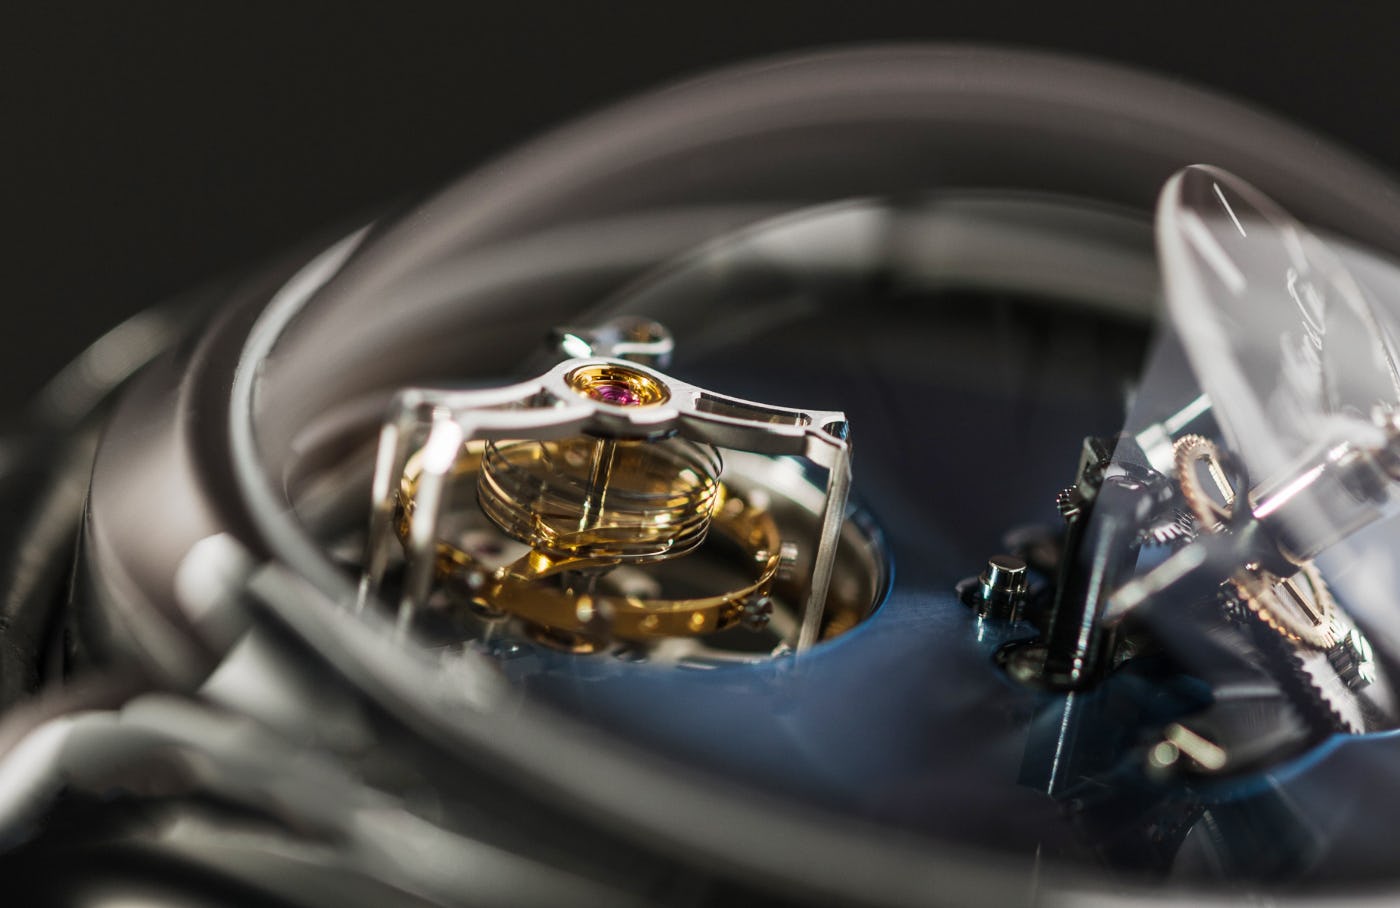 H. Moser x MB&F Endeavour Cylindrical Tourbillon dial detail